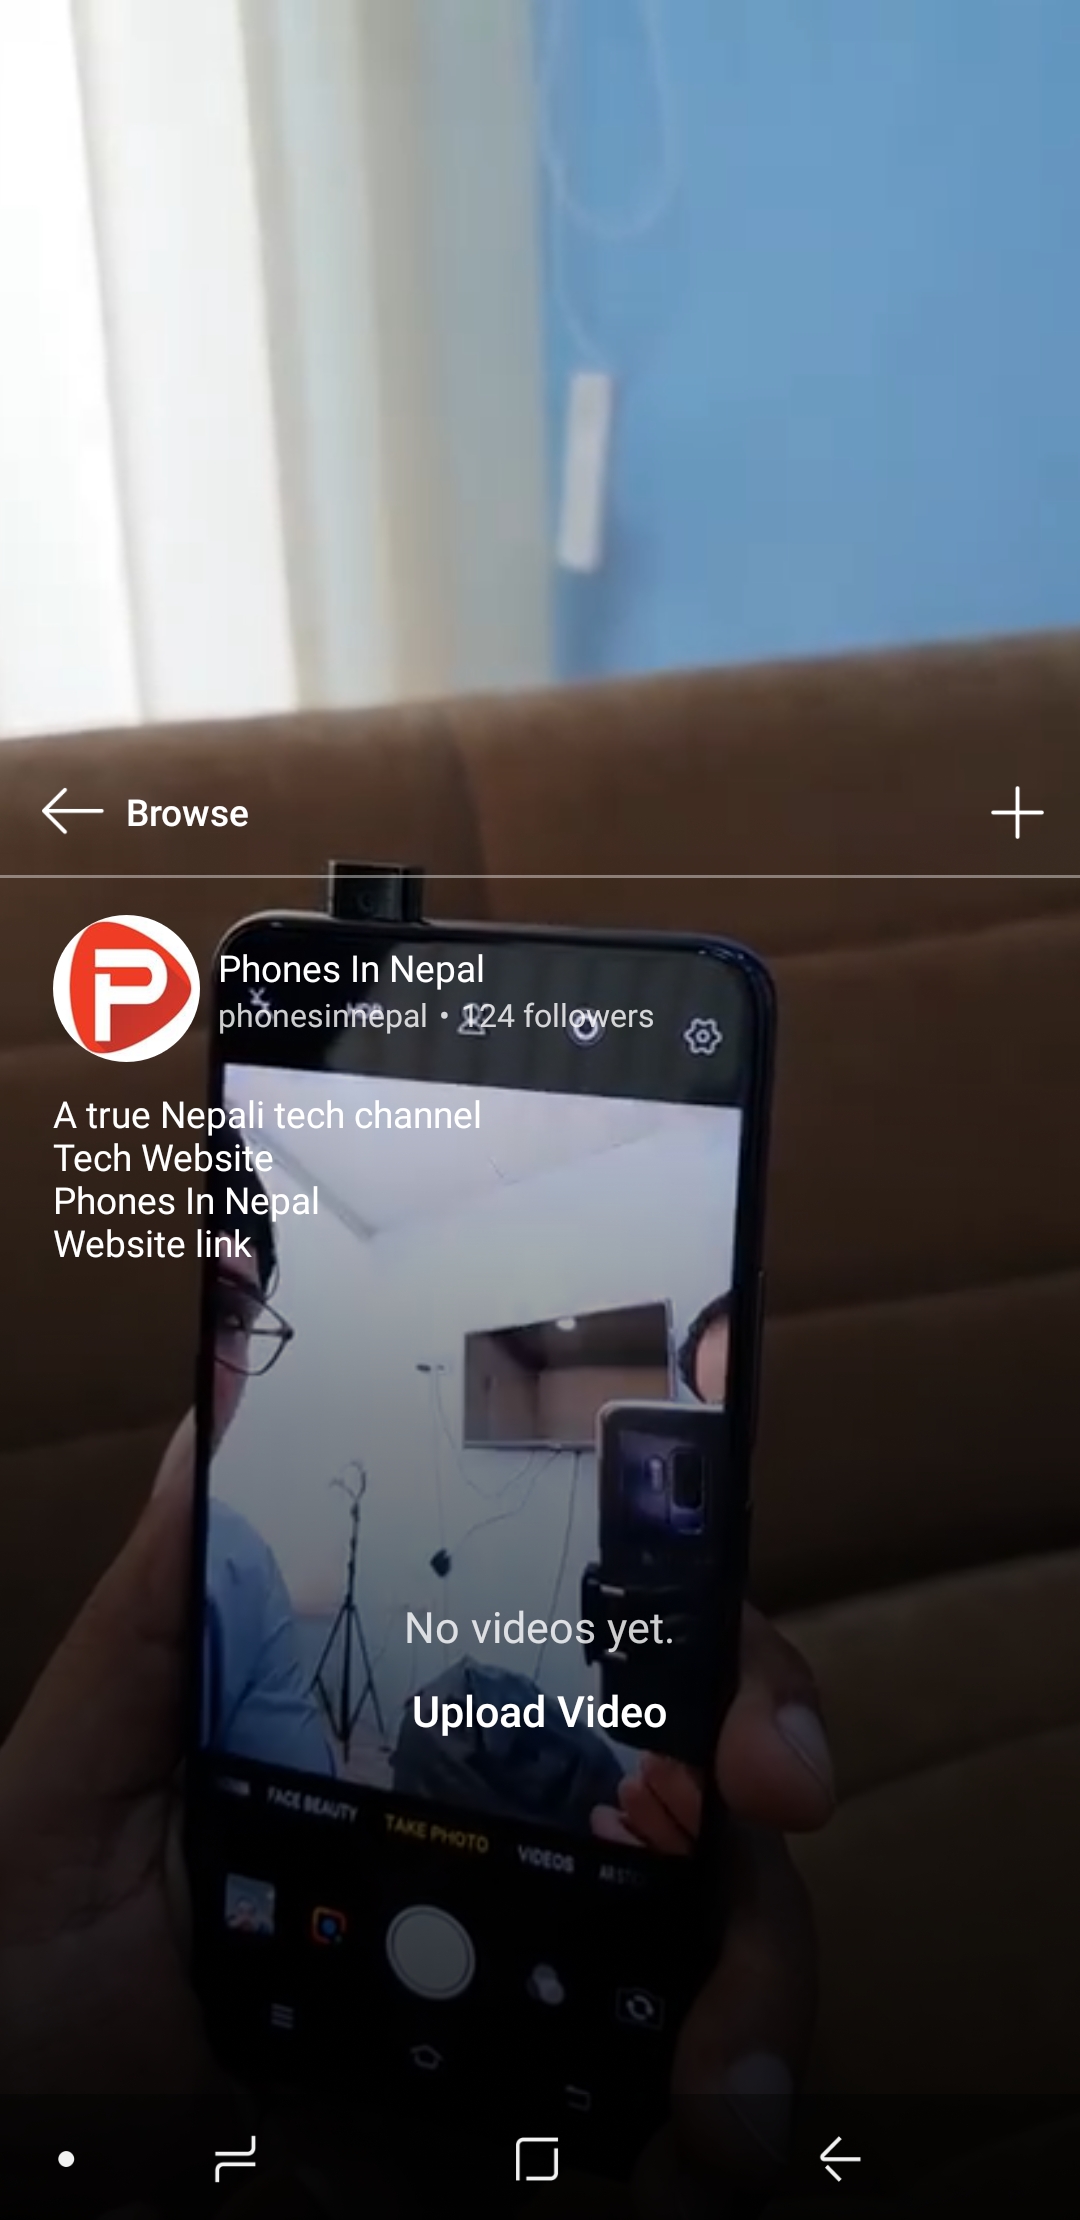 IGTV: A new standalone video app from Instagram